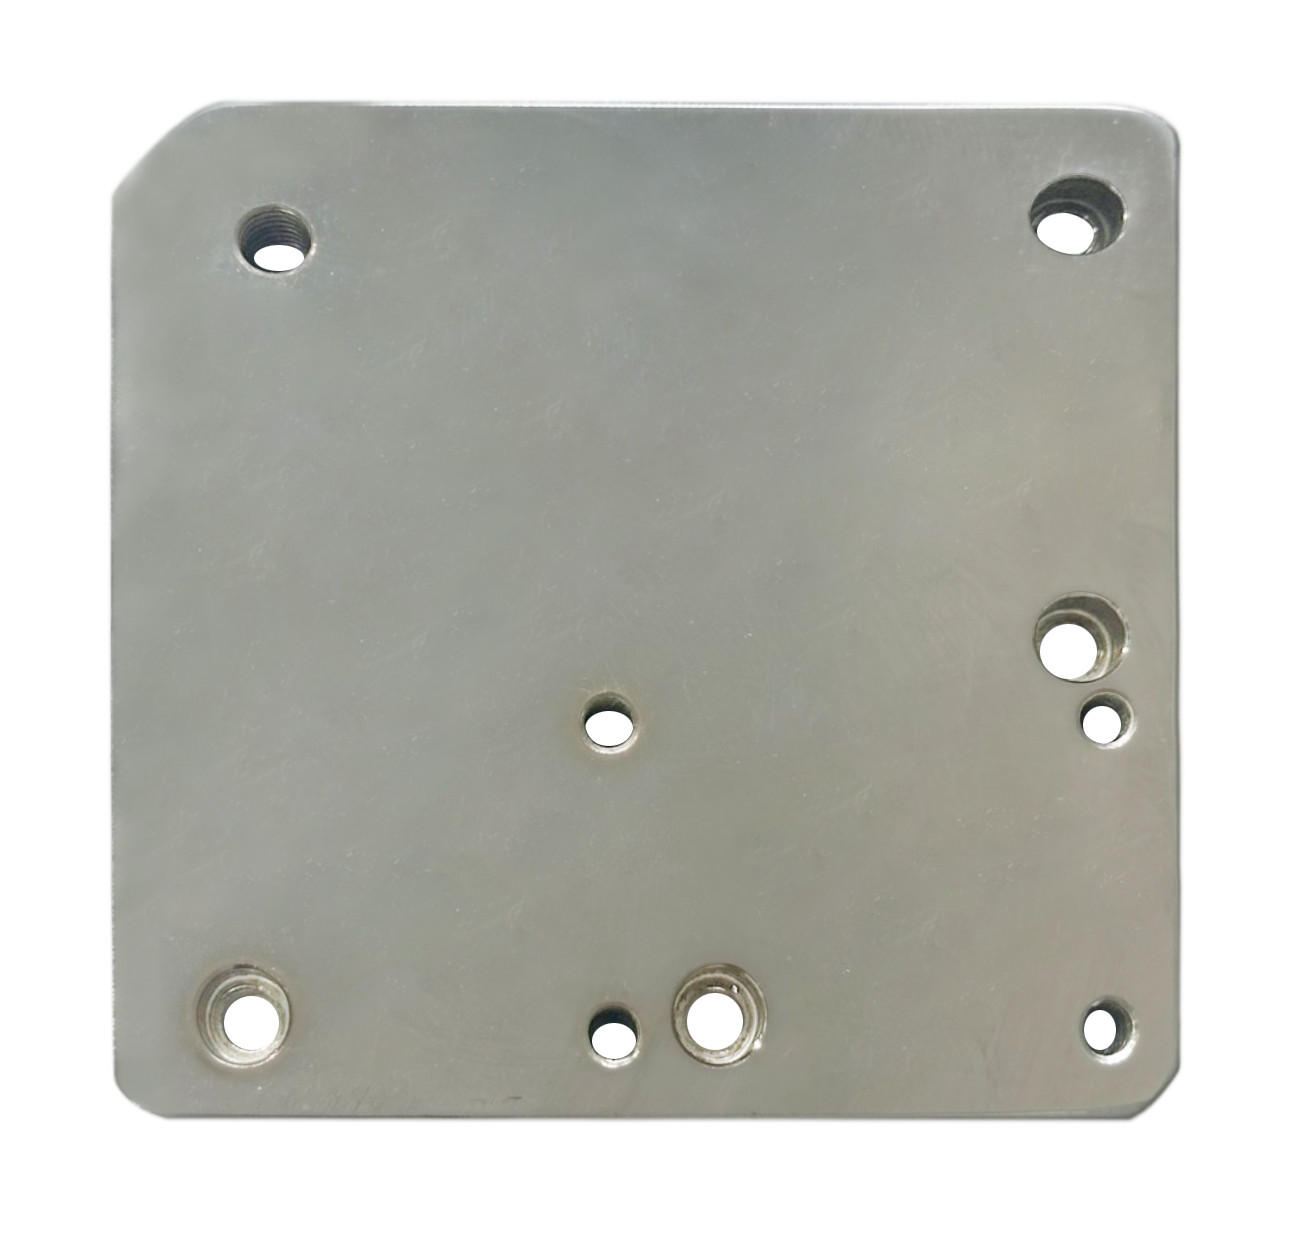 Mounting plate for frame, caster & adjuster pad (E-HAJPC3030-M12-8) 